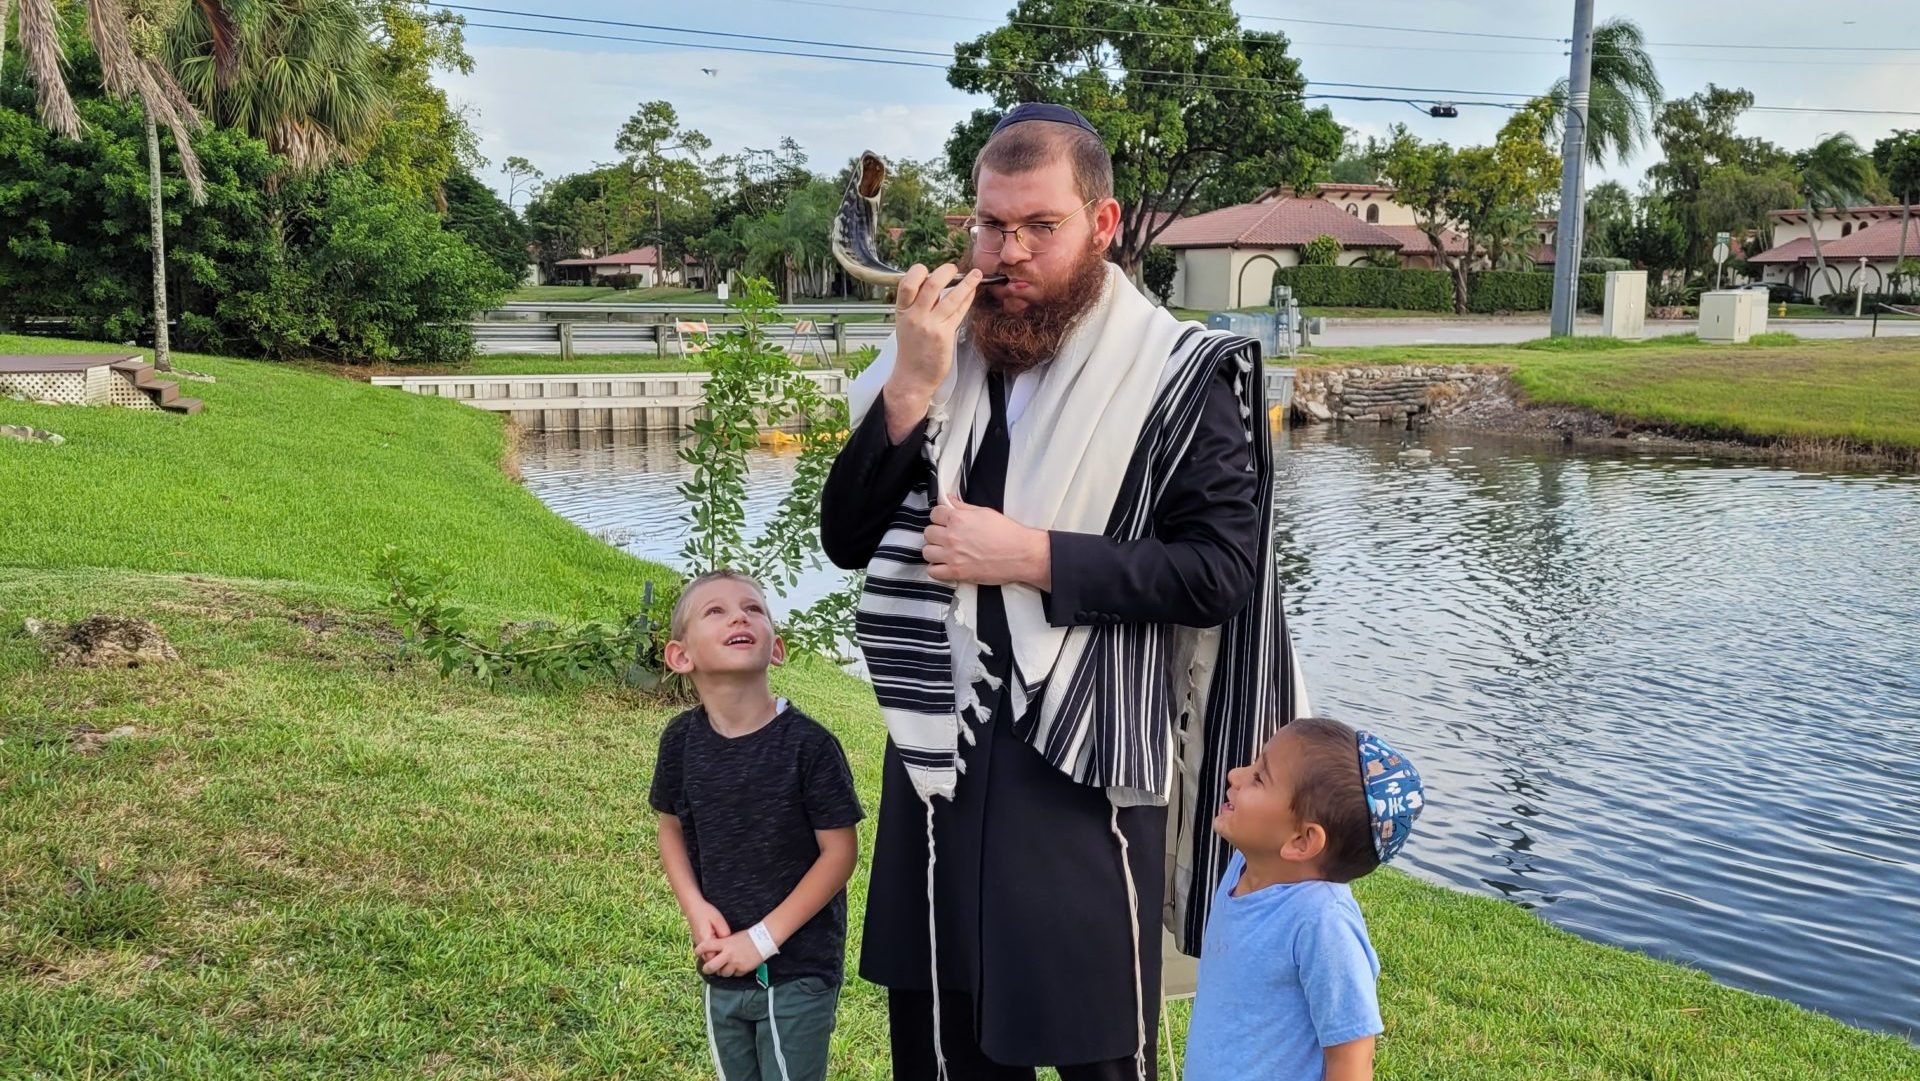 Celebrate The New Year With The Chabad Jewish Center of Tamarac